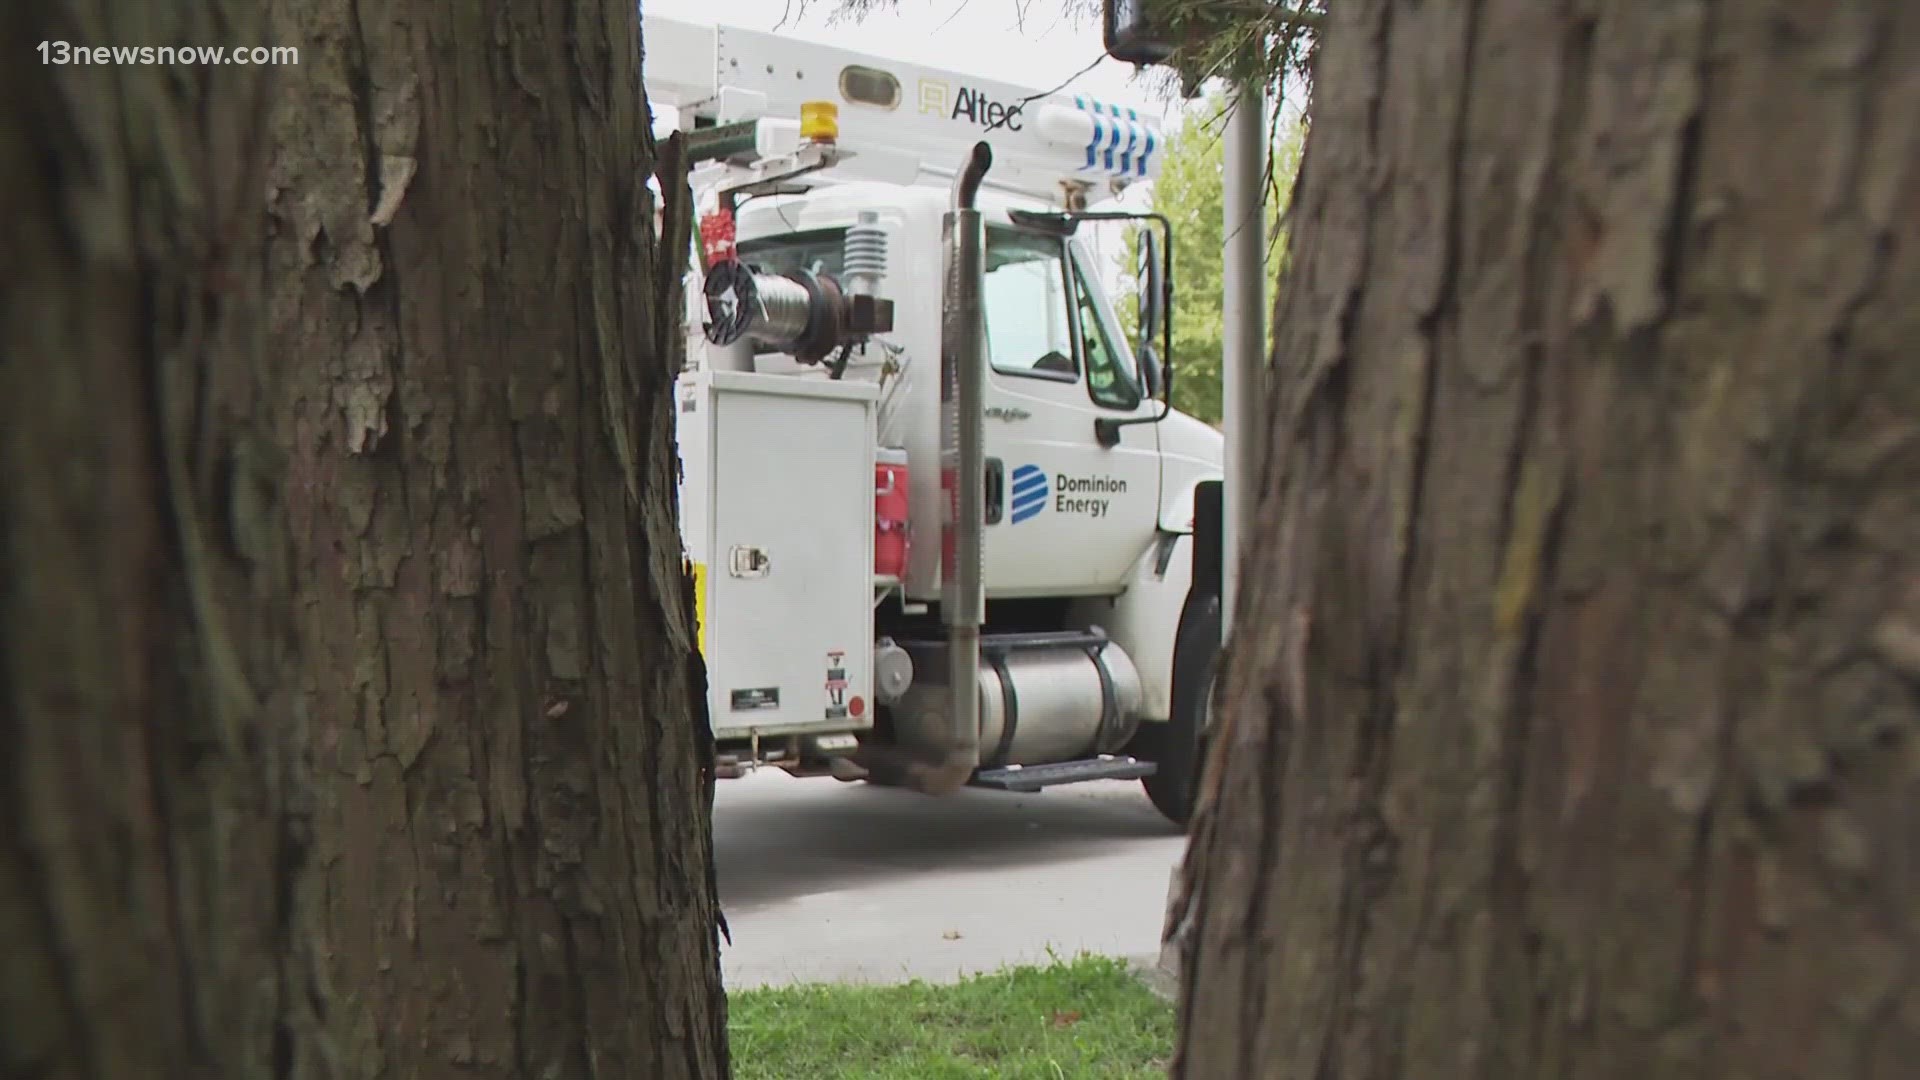 On Thursday, Dominion Energy crews began clearing away trees — a major cause of power outages in a storm, according to a company spokesperson.